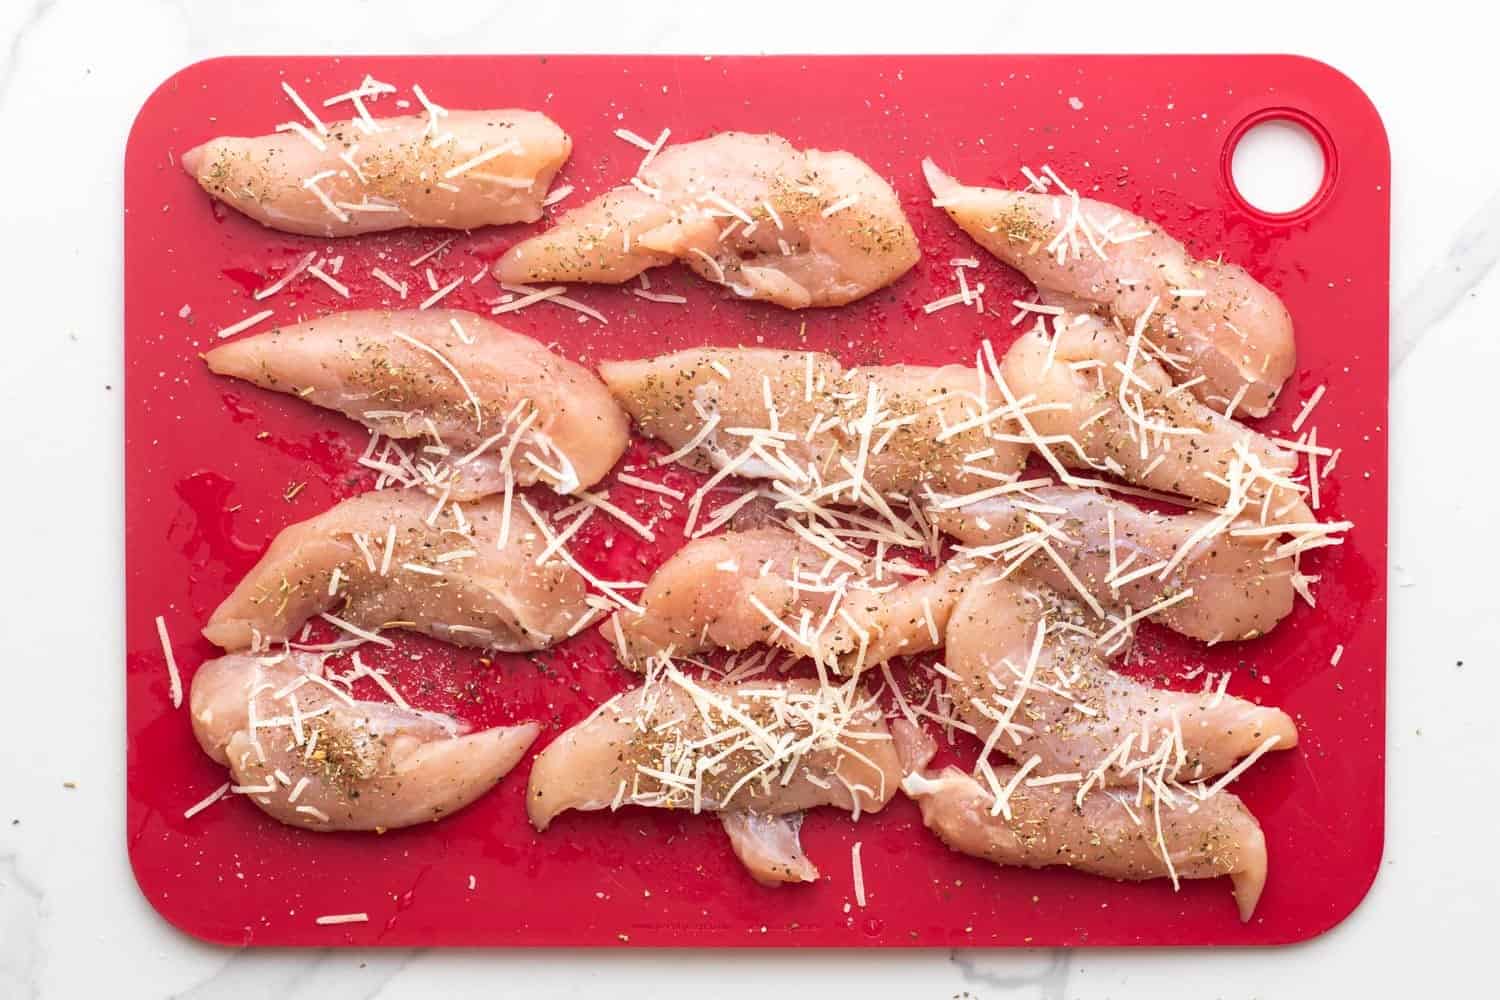 a red plastic cutting board holding 13 chicken tenderloins that have been seasoned with italian seasoning and parmesan cheese shreds.